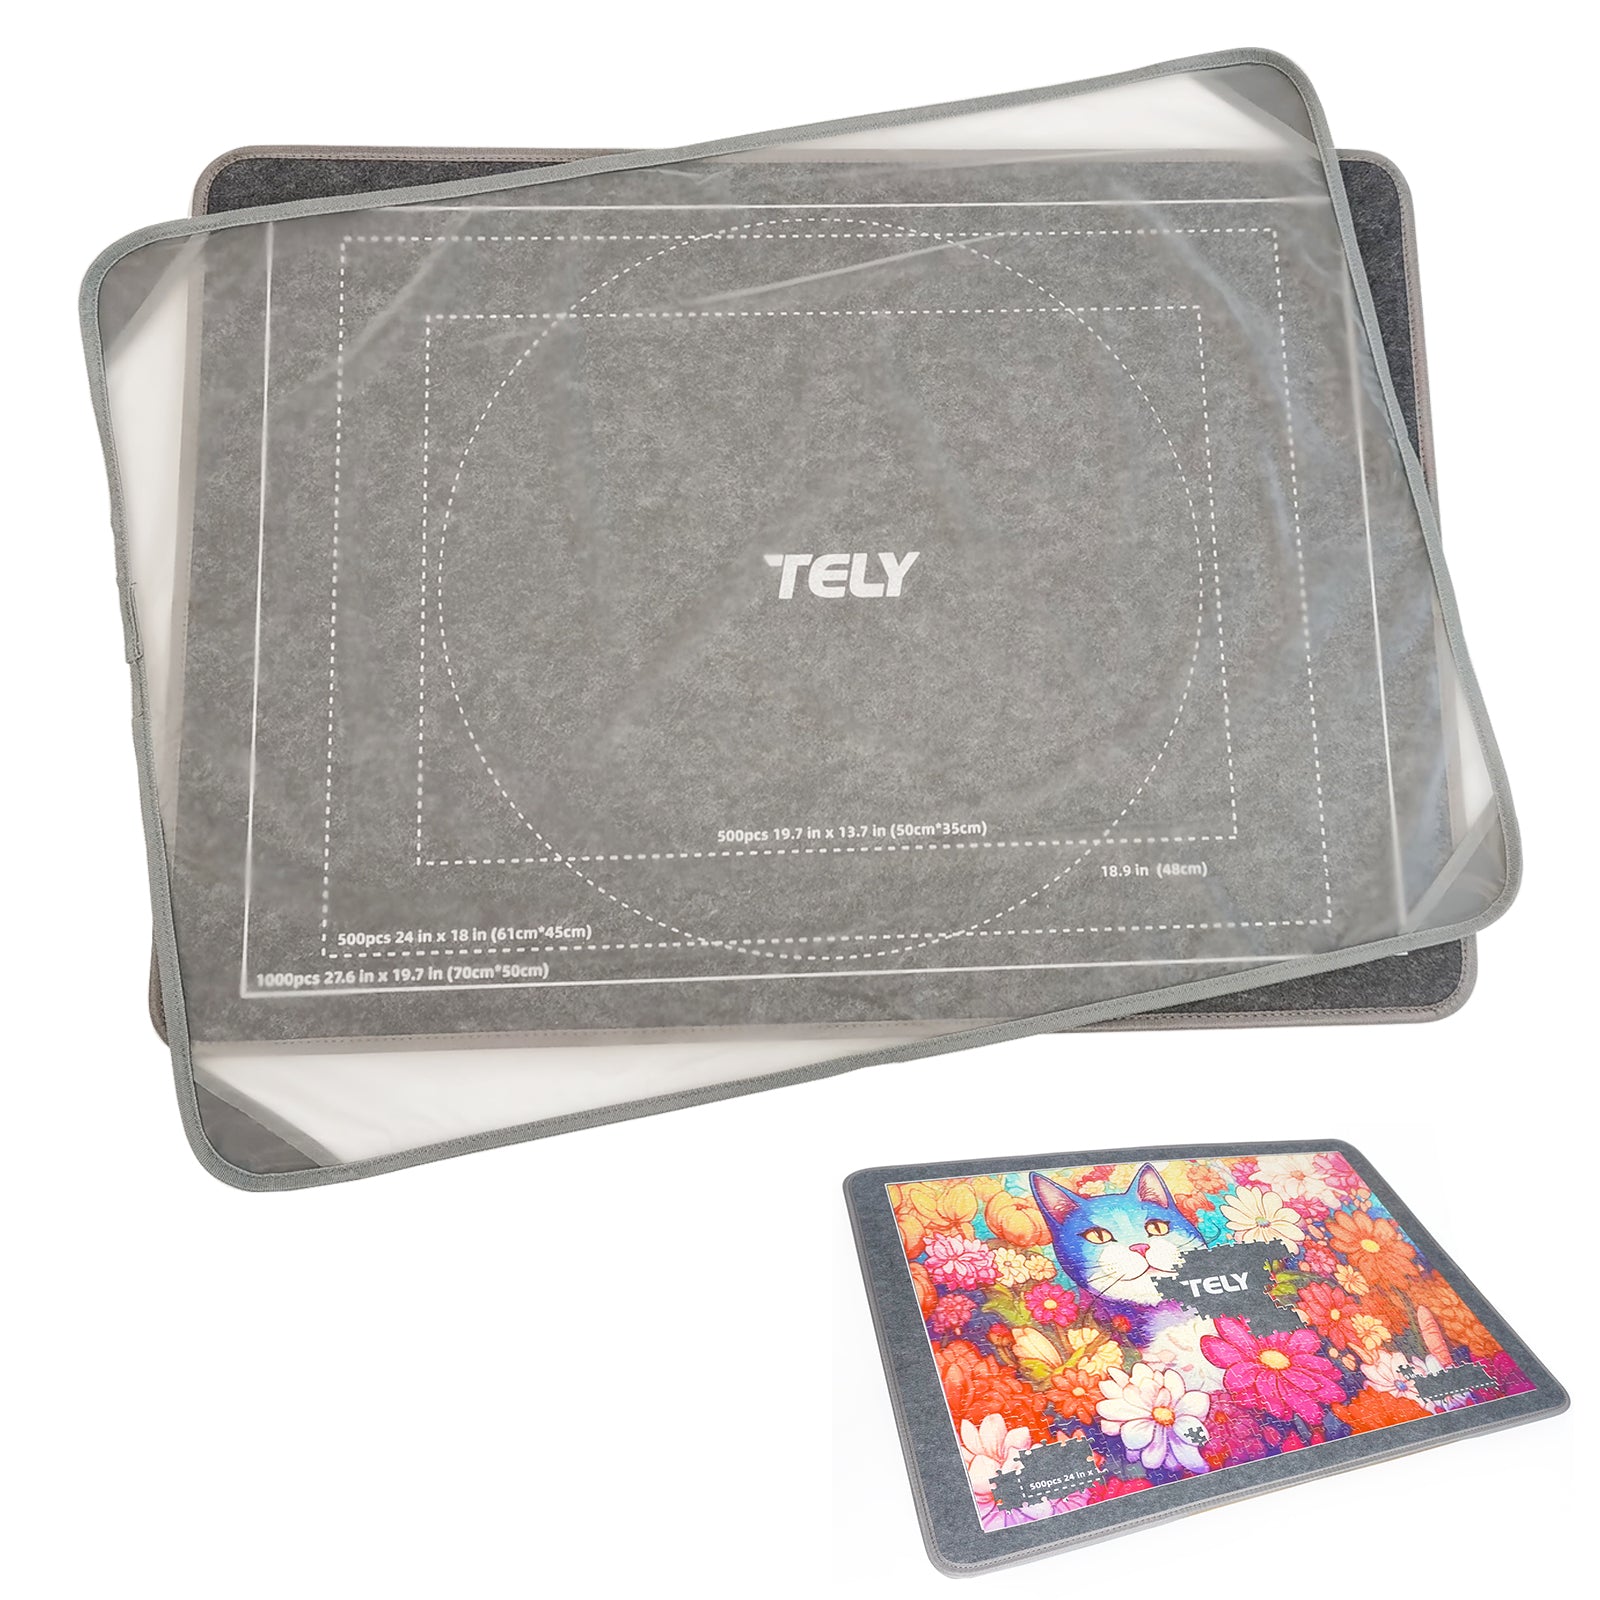 TELY Stiff-Felt Puzzle Board with Cover - Up to 1000 Pieces - Easy